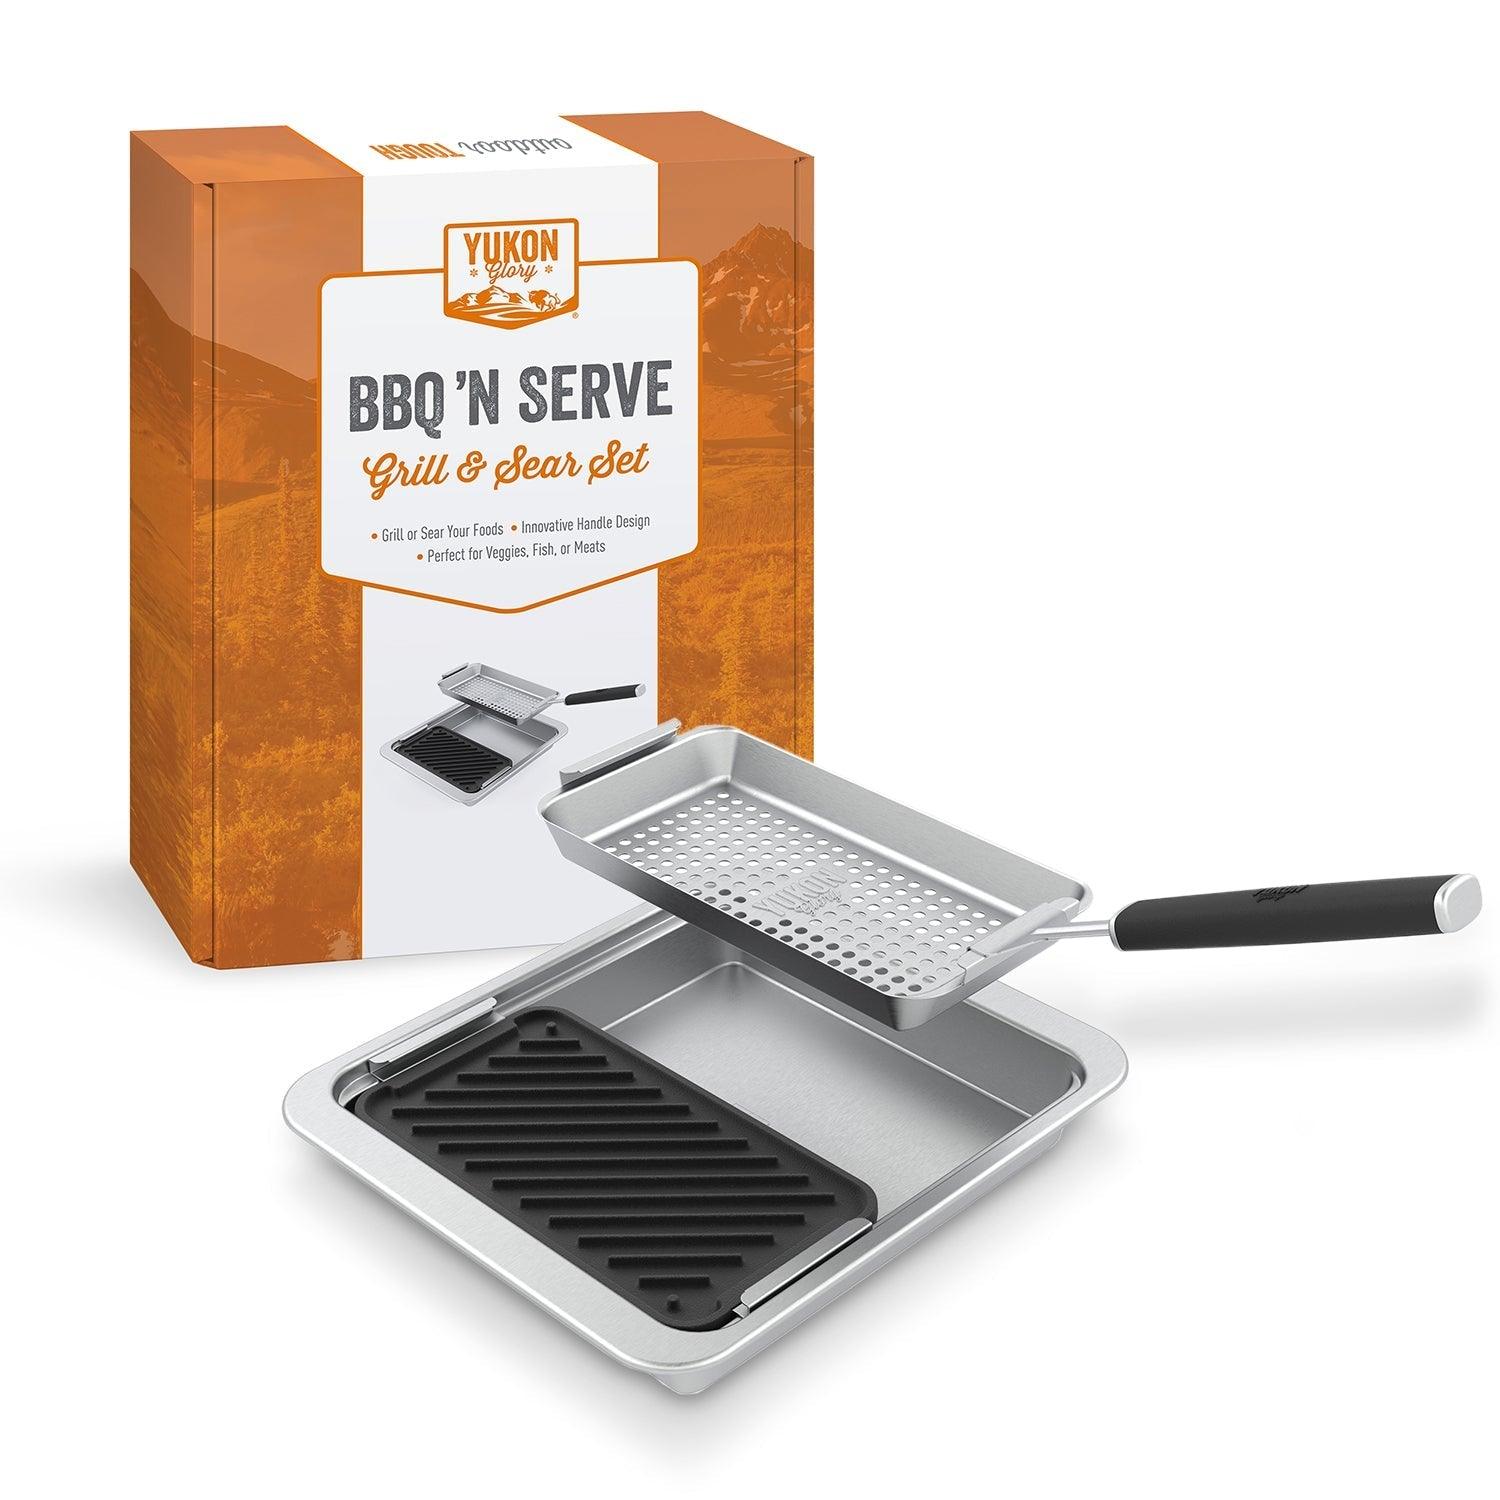 Yukon Glory BBQ 'N SERVE Grill & Sear Set Includes a BBQ Grill Basket - Cast Iron Grill Pan a Serving Tray & Clip-On Handle - Perfect Grill Baskets for Outdoor Grill Vegetables or Fish Basket & Meat